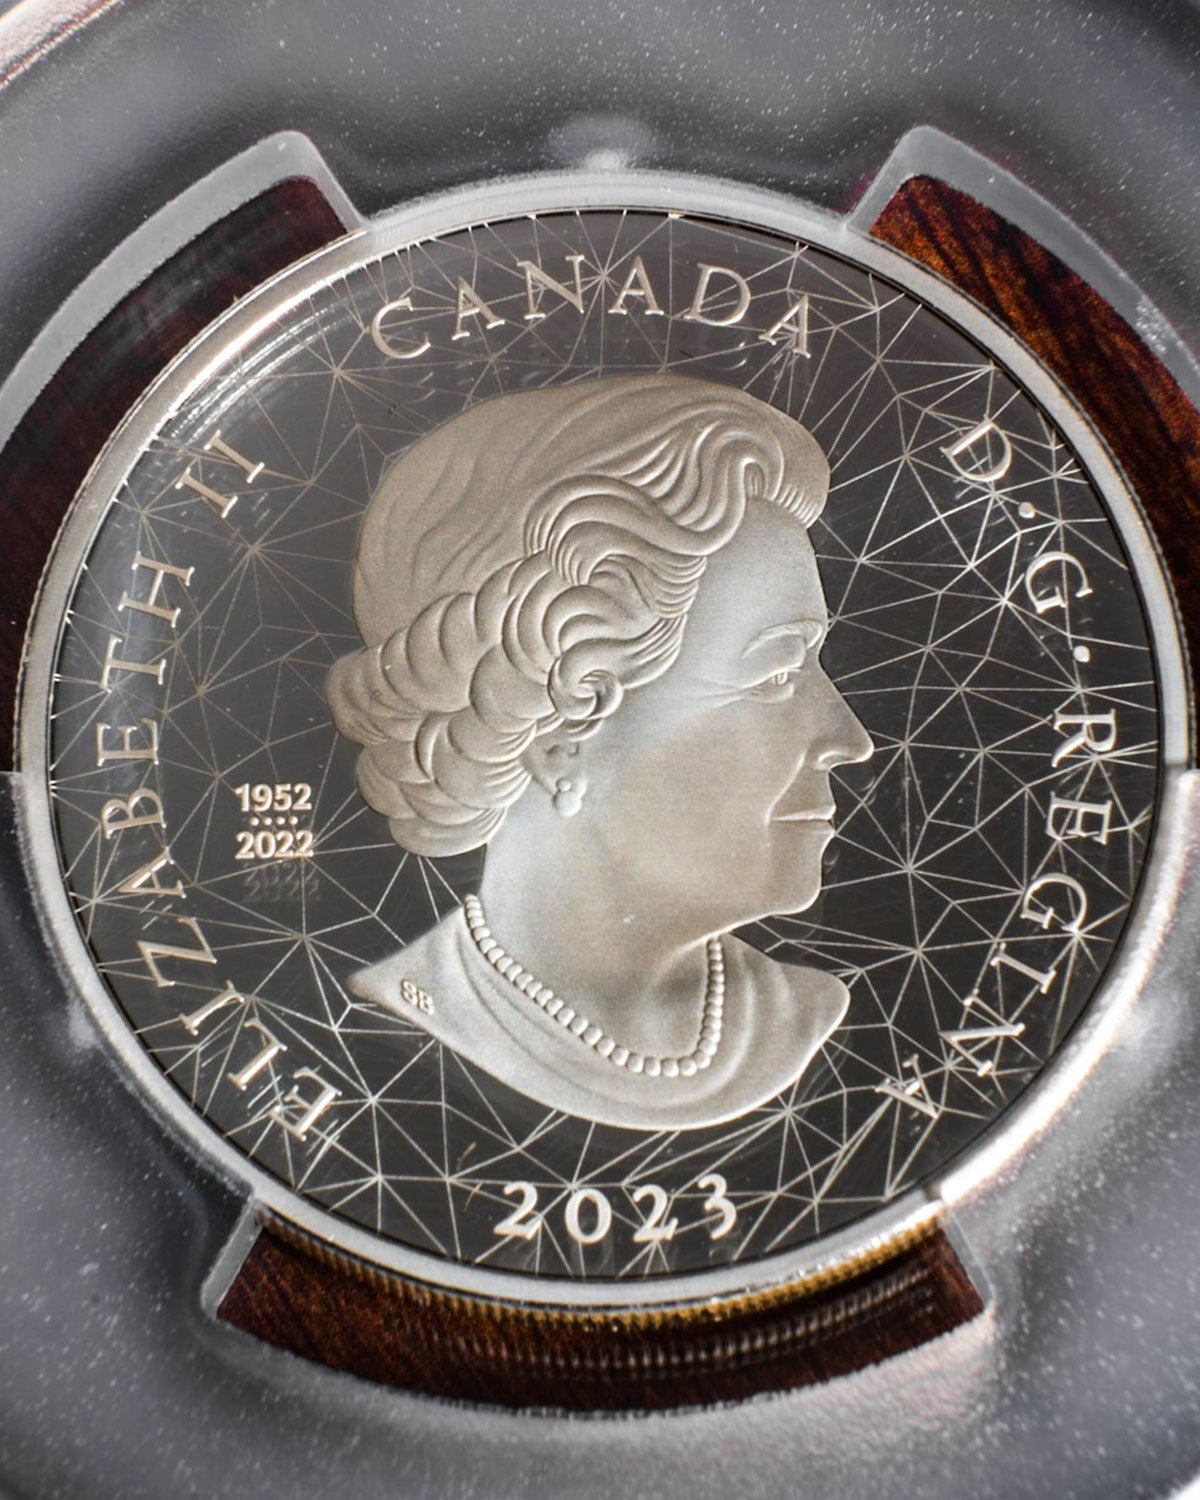 2023 $30 Canada Multifaceted Grizzly Bears | First Day of Issue PCGS PR70 DCAM | Susanna Blunt Autographed